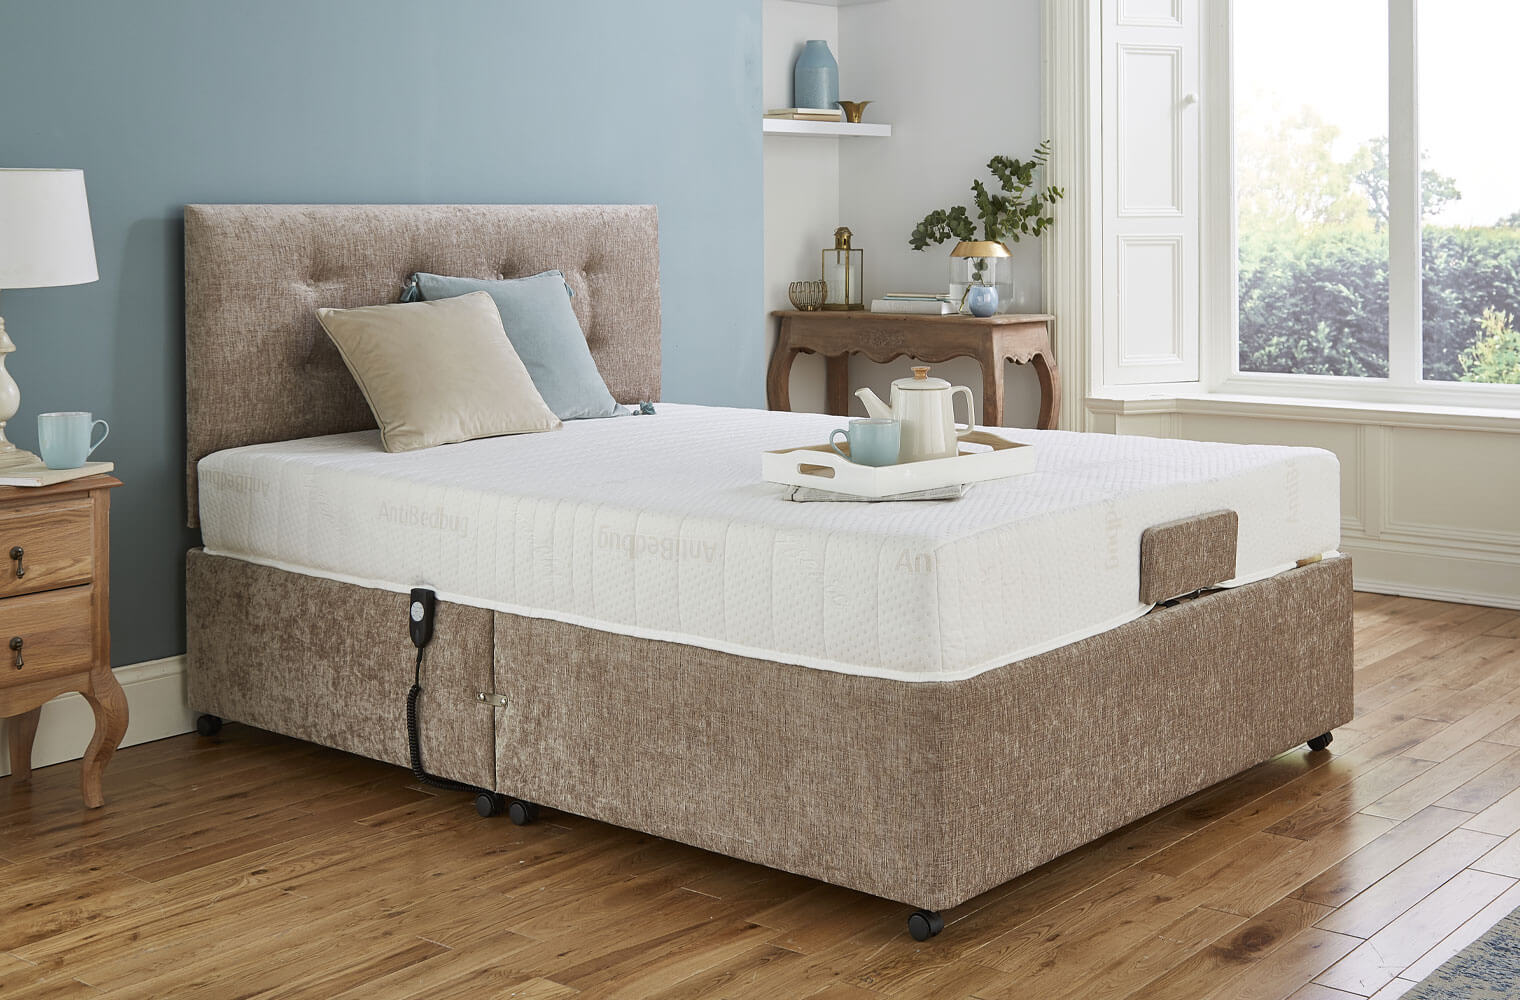 An image of Middletons Chester Classic Fully Adjustable Automatic Bed with Remote Control Du...